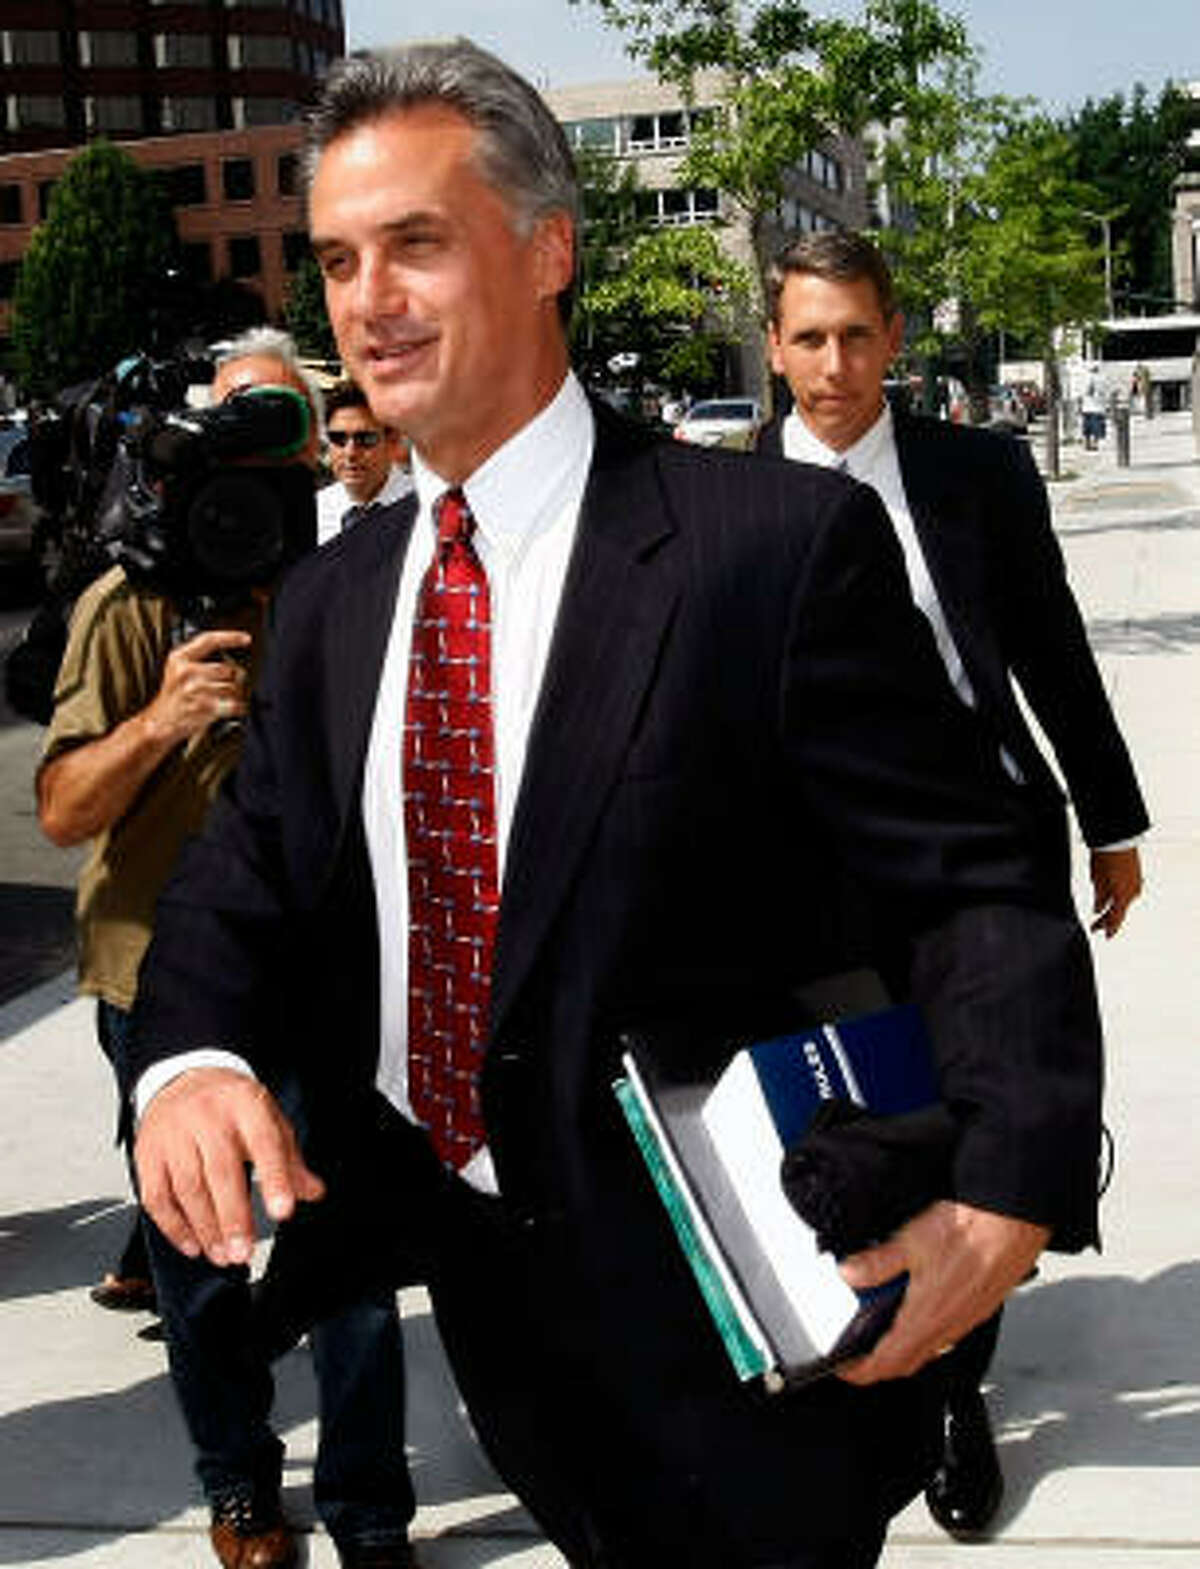 Federal prosecutor Steven Tyrrell leaves a courthouse in Richmond, Va., after R. Allen Stanford's court appearance.